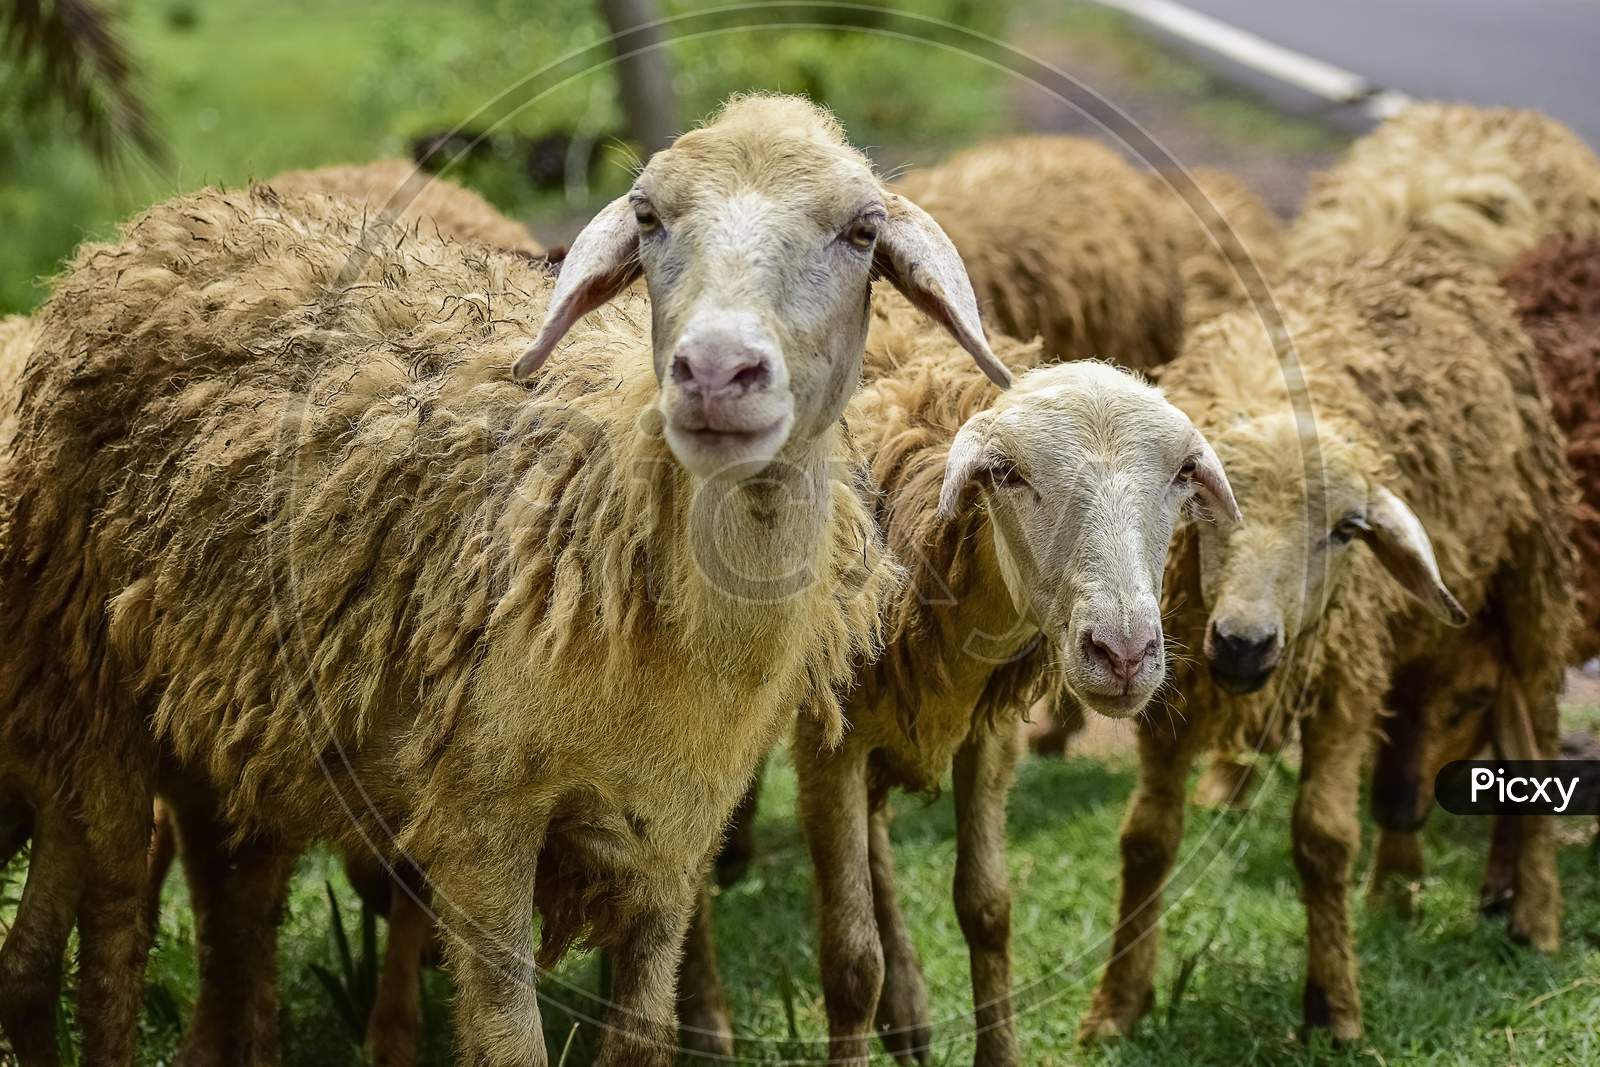 Sheep And Lambs In Flock Of Some Unknown Livestock Farm In Close Encounter Looking With A Curious And Inquisitive Eyes. India. Asia. 2019.